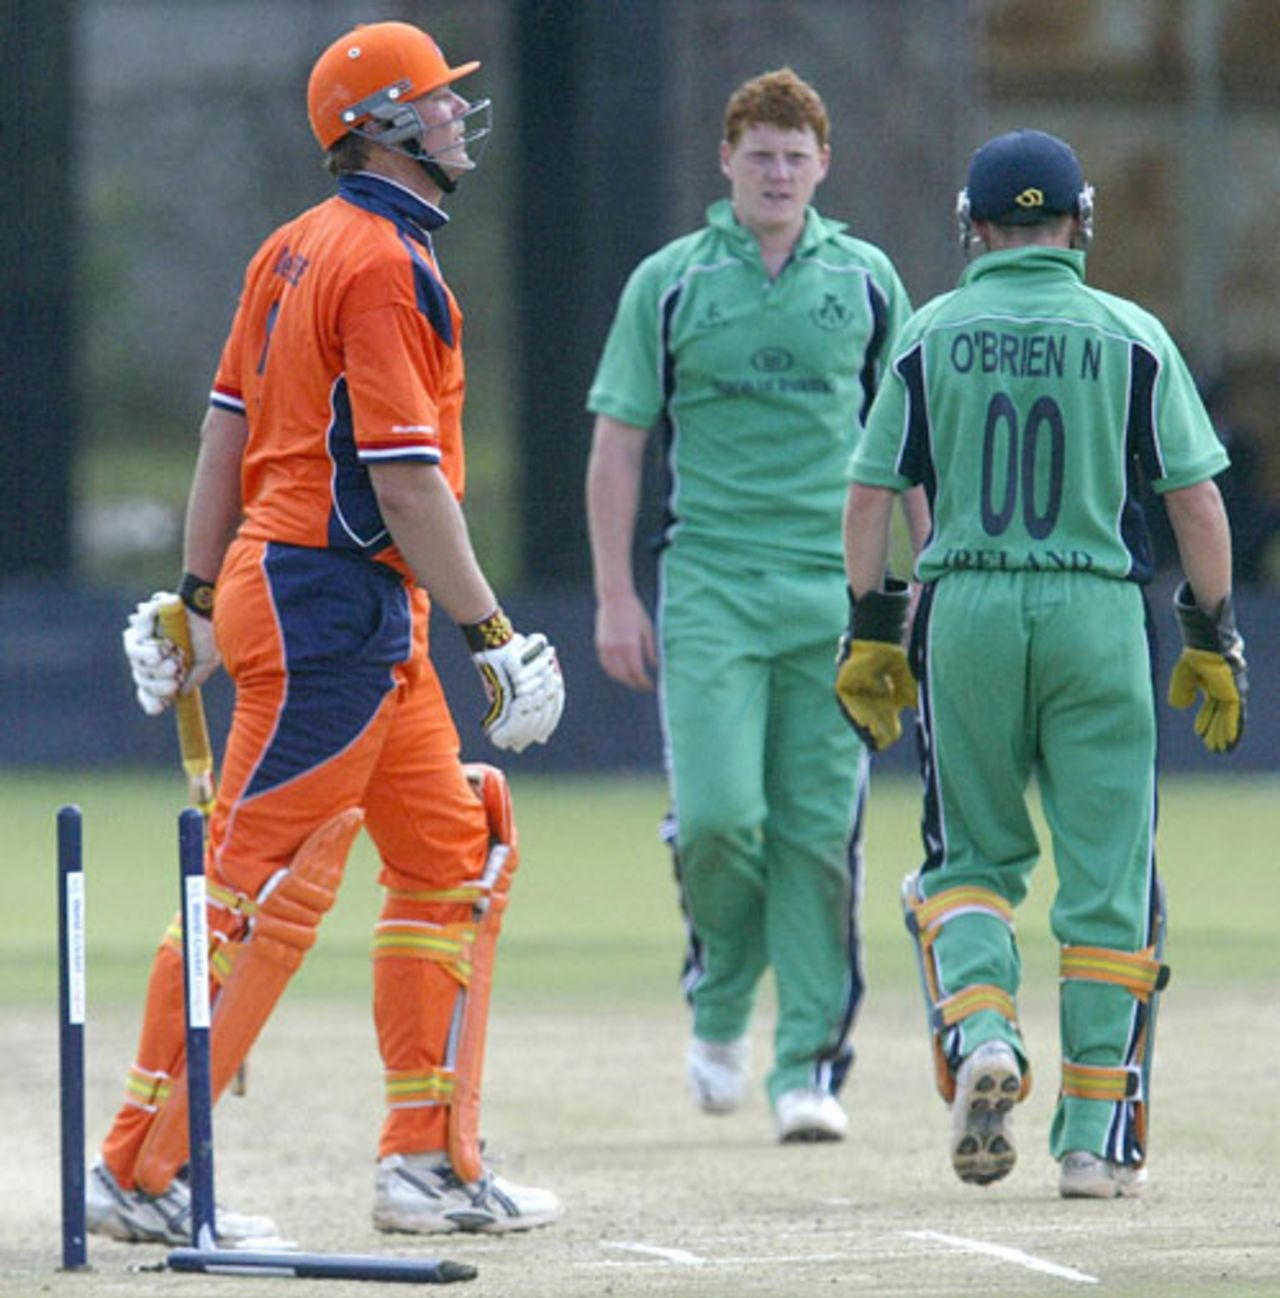 Tim de Leede is cleaned up by Kevin O'Brien, Ireland v Netherlands, World Cricket League, Nairobi, February 5, 2007